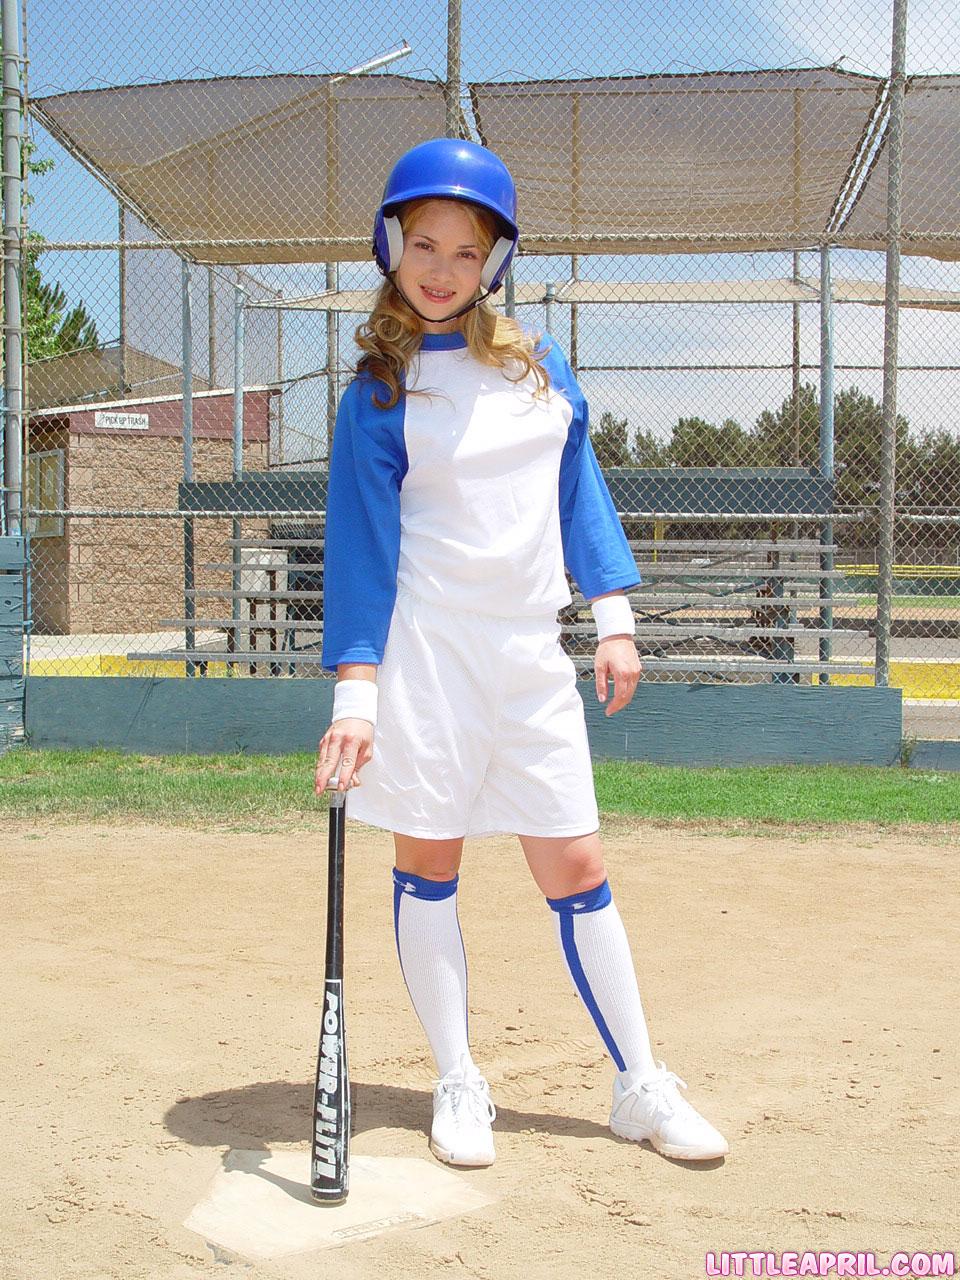 Pictures of Little April masturbating after a game of baseball #58993577